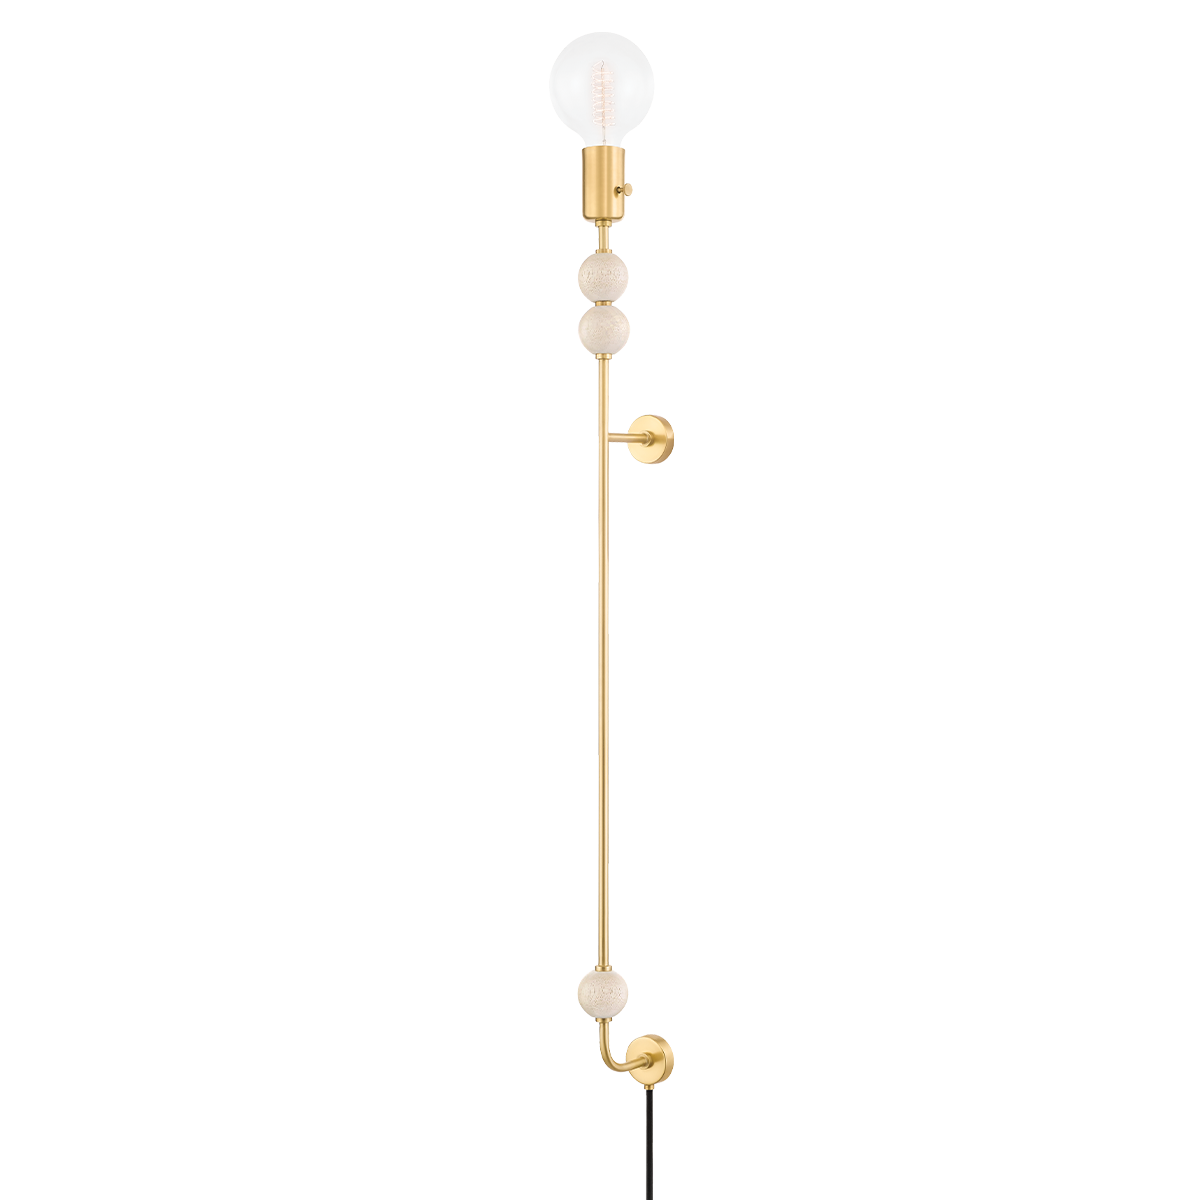 Slater 1 light Portable Wall Scone-Mitzi-HVL-HL491201-AGB-Wall LightingAged Brass-1-France and Son